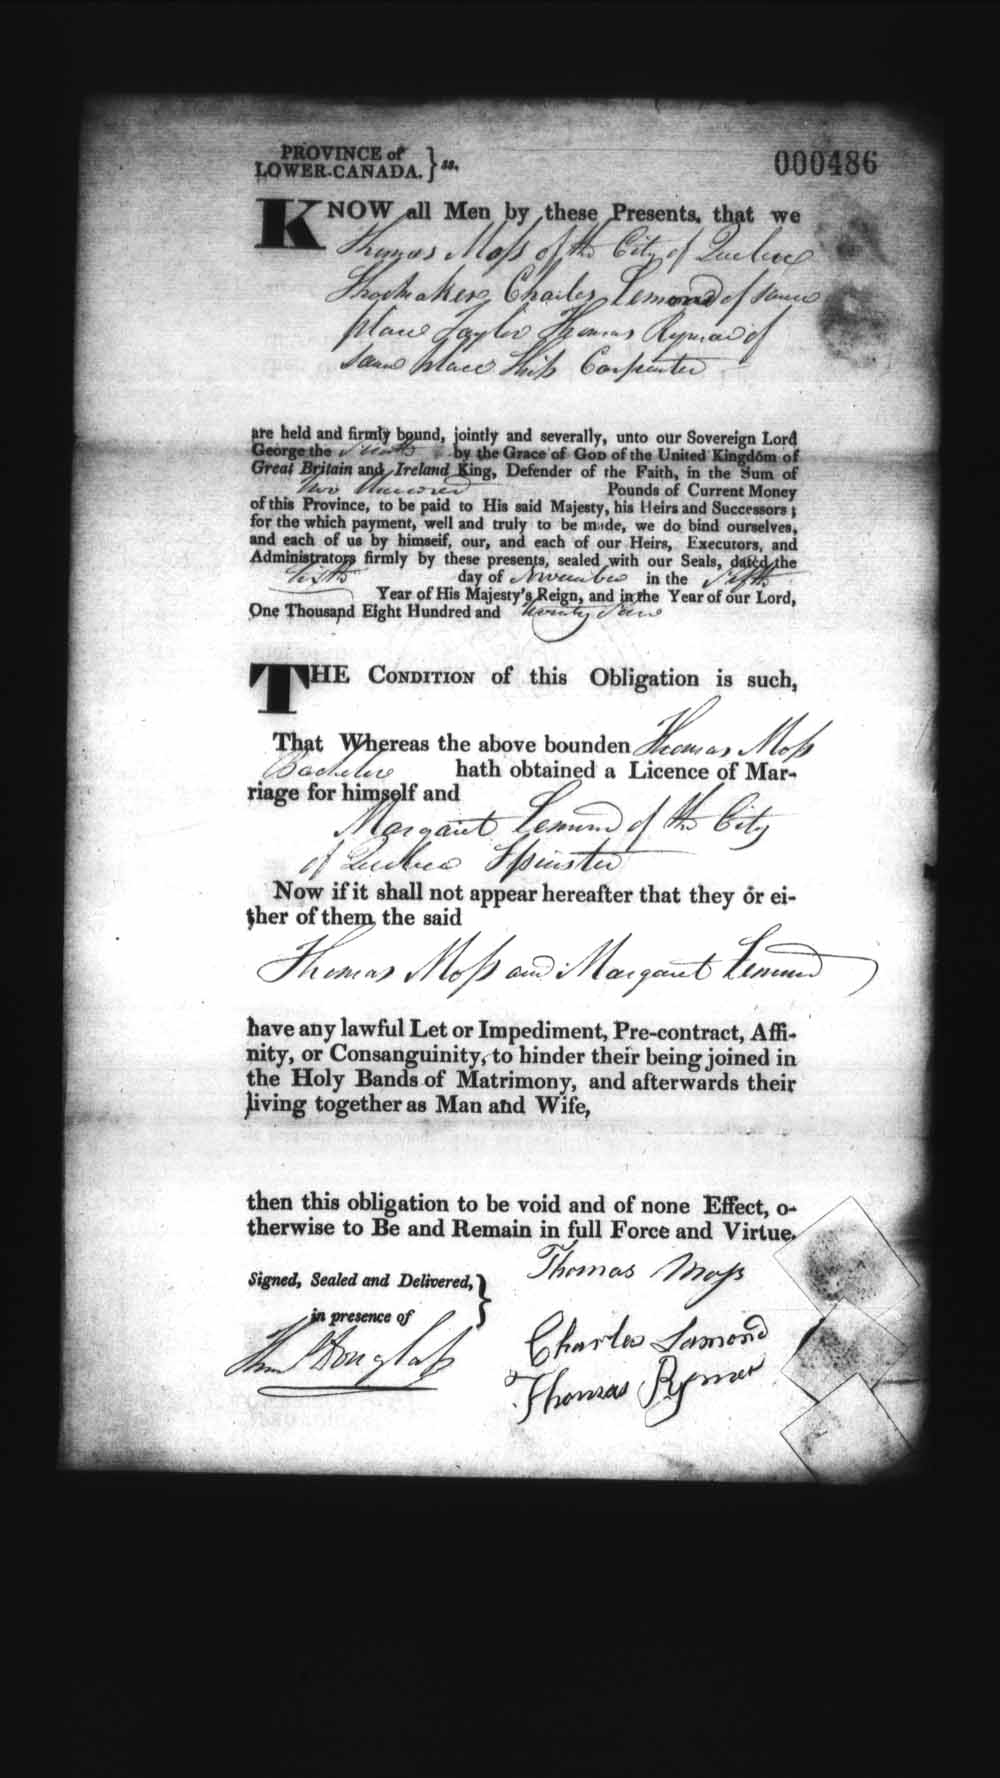 Digitized page of Upper and Lower Canada Marriage Bonds (1779-1865) for Image No.: e008236398